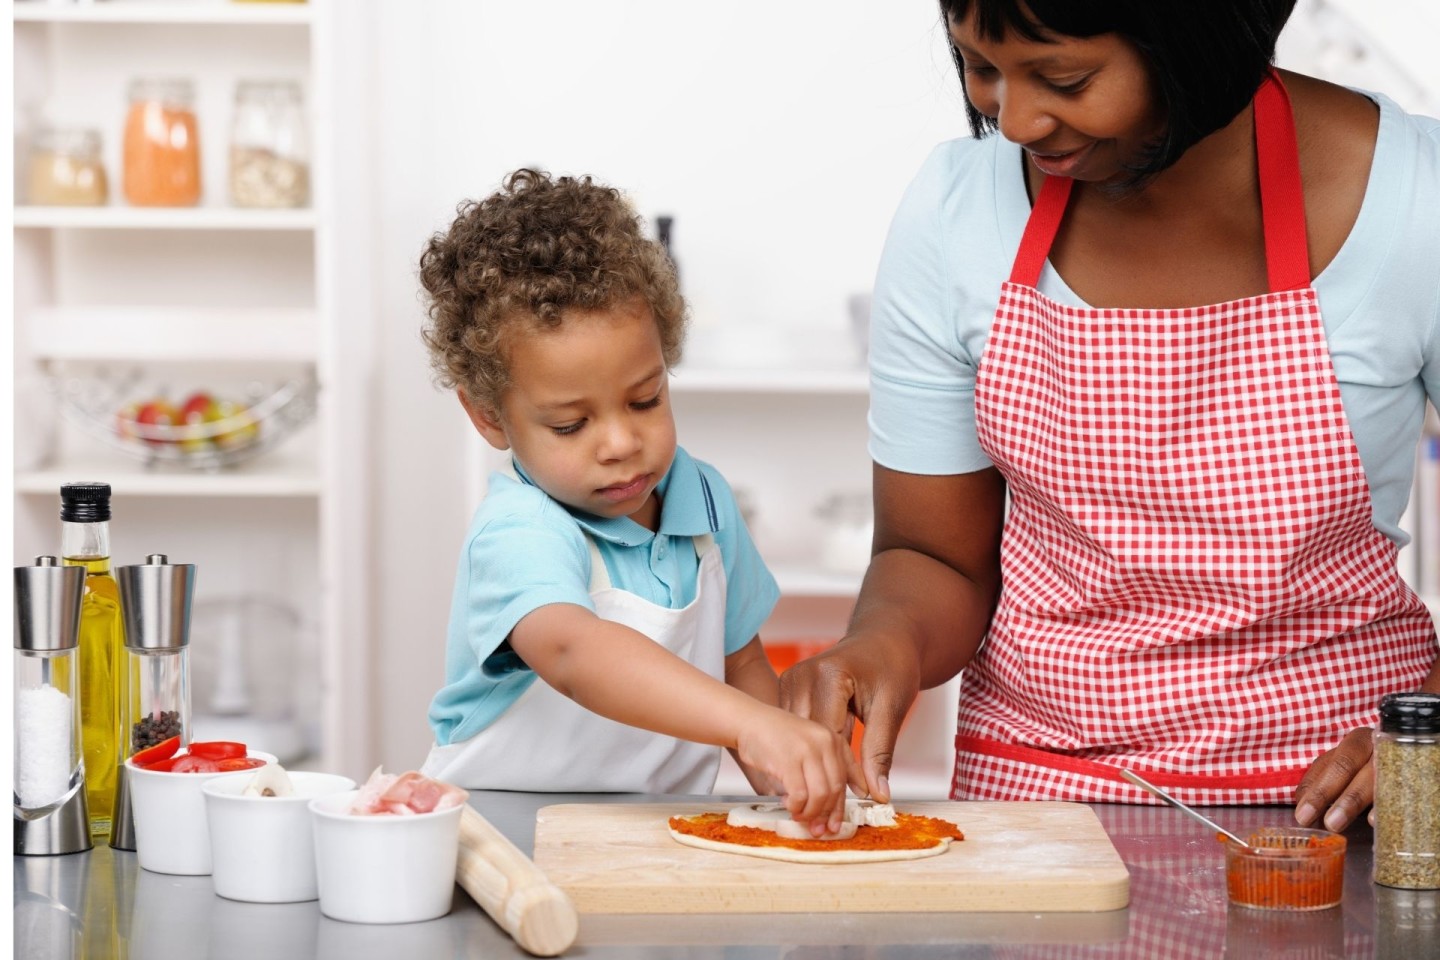 Toddler dinner idea: Mother and toddler making homemade pizza.